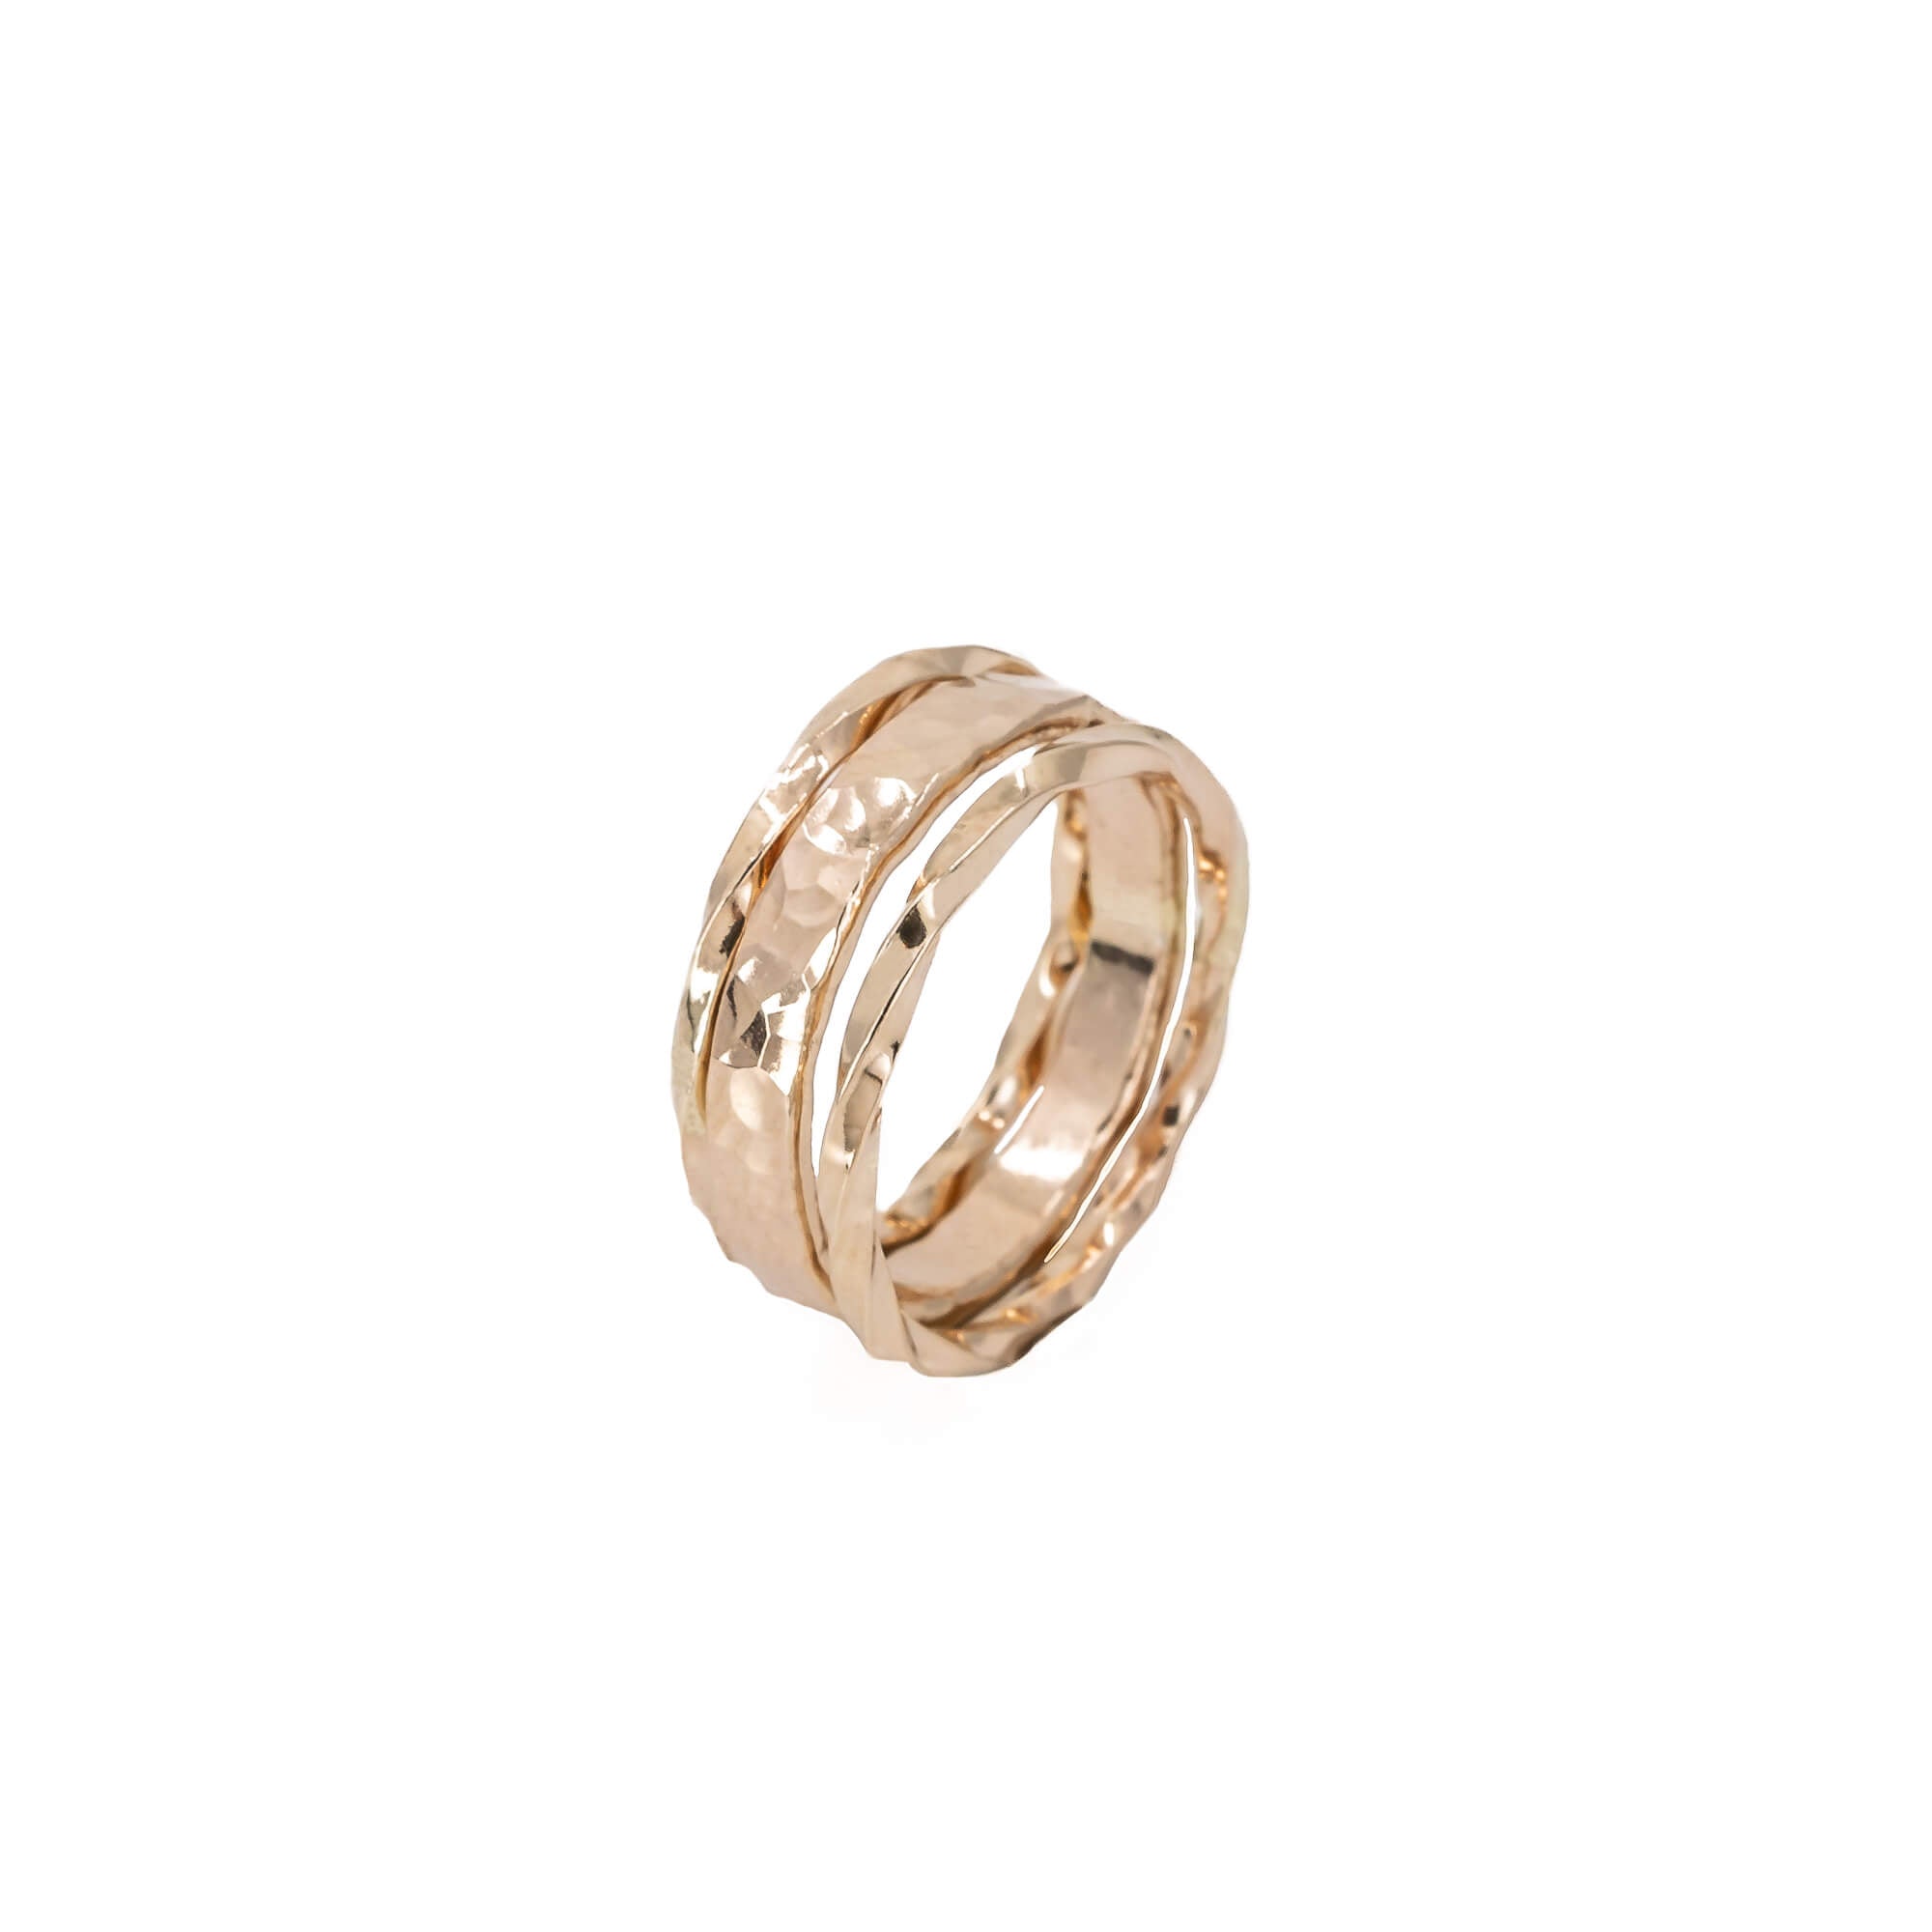 set of 3 14K yellow gold fill stackable, everyday rings